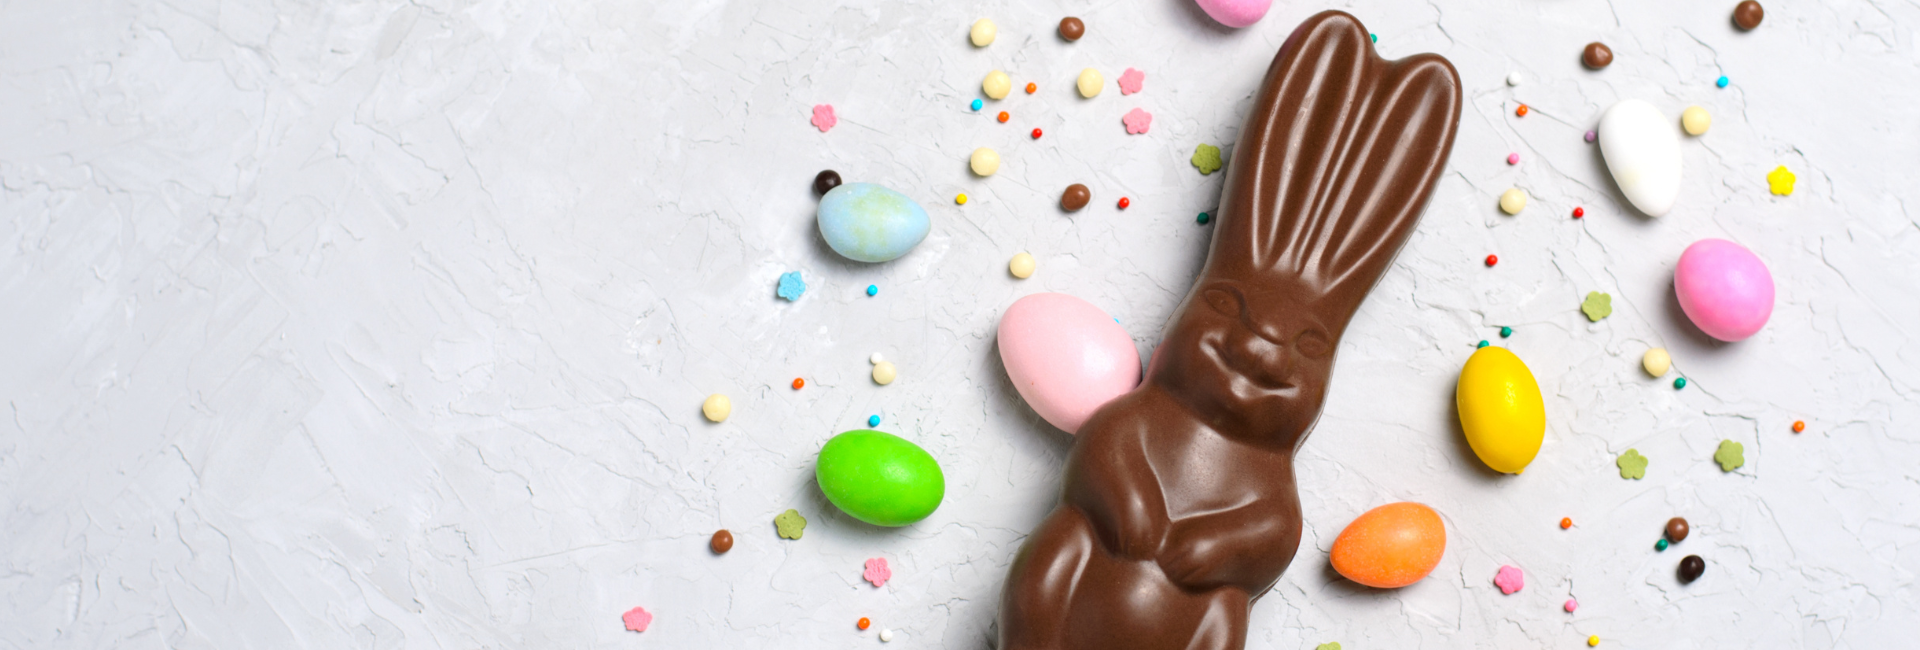 The Easter Bunny vs Intelligent Supply Chain Systems in Manufacturing